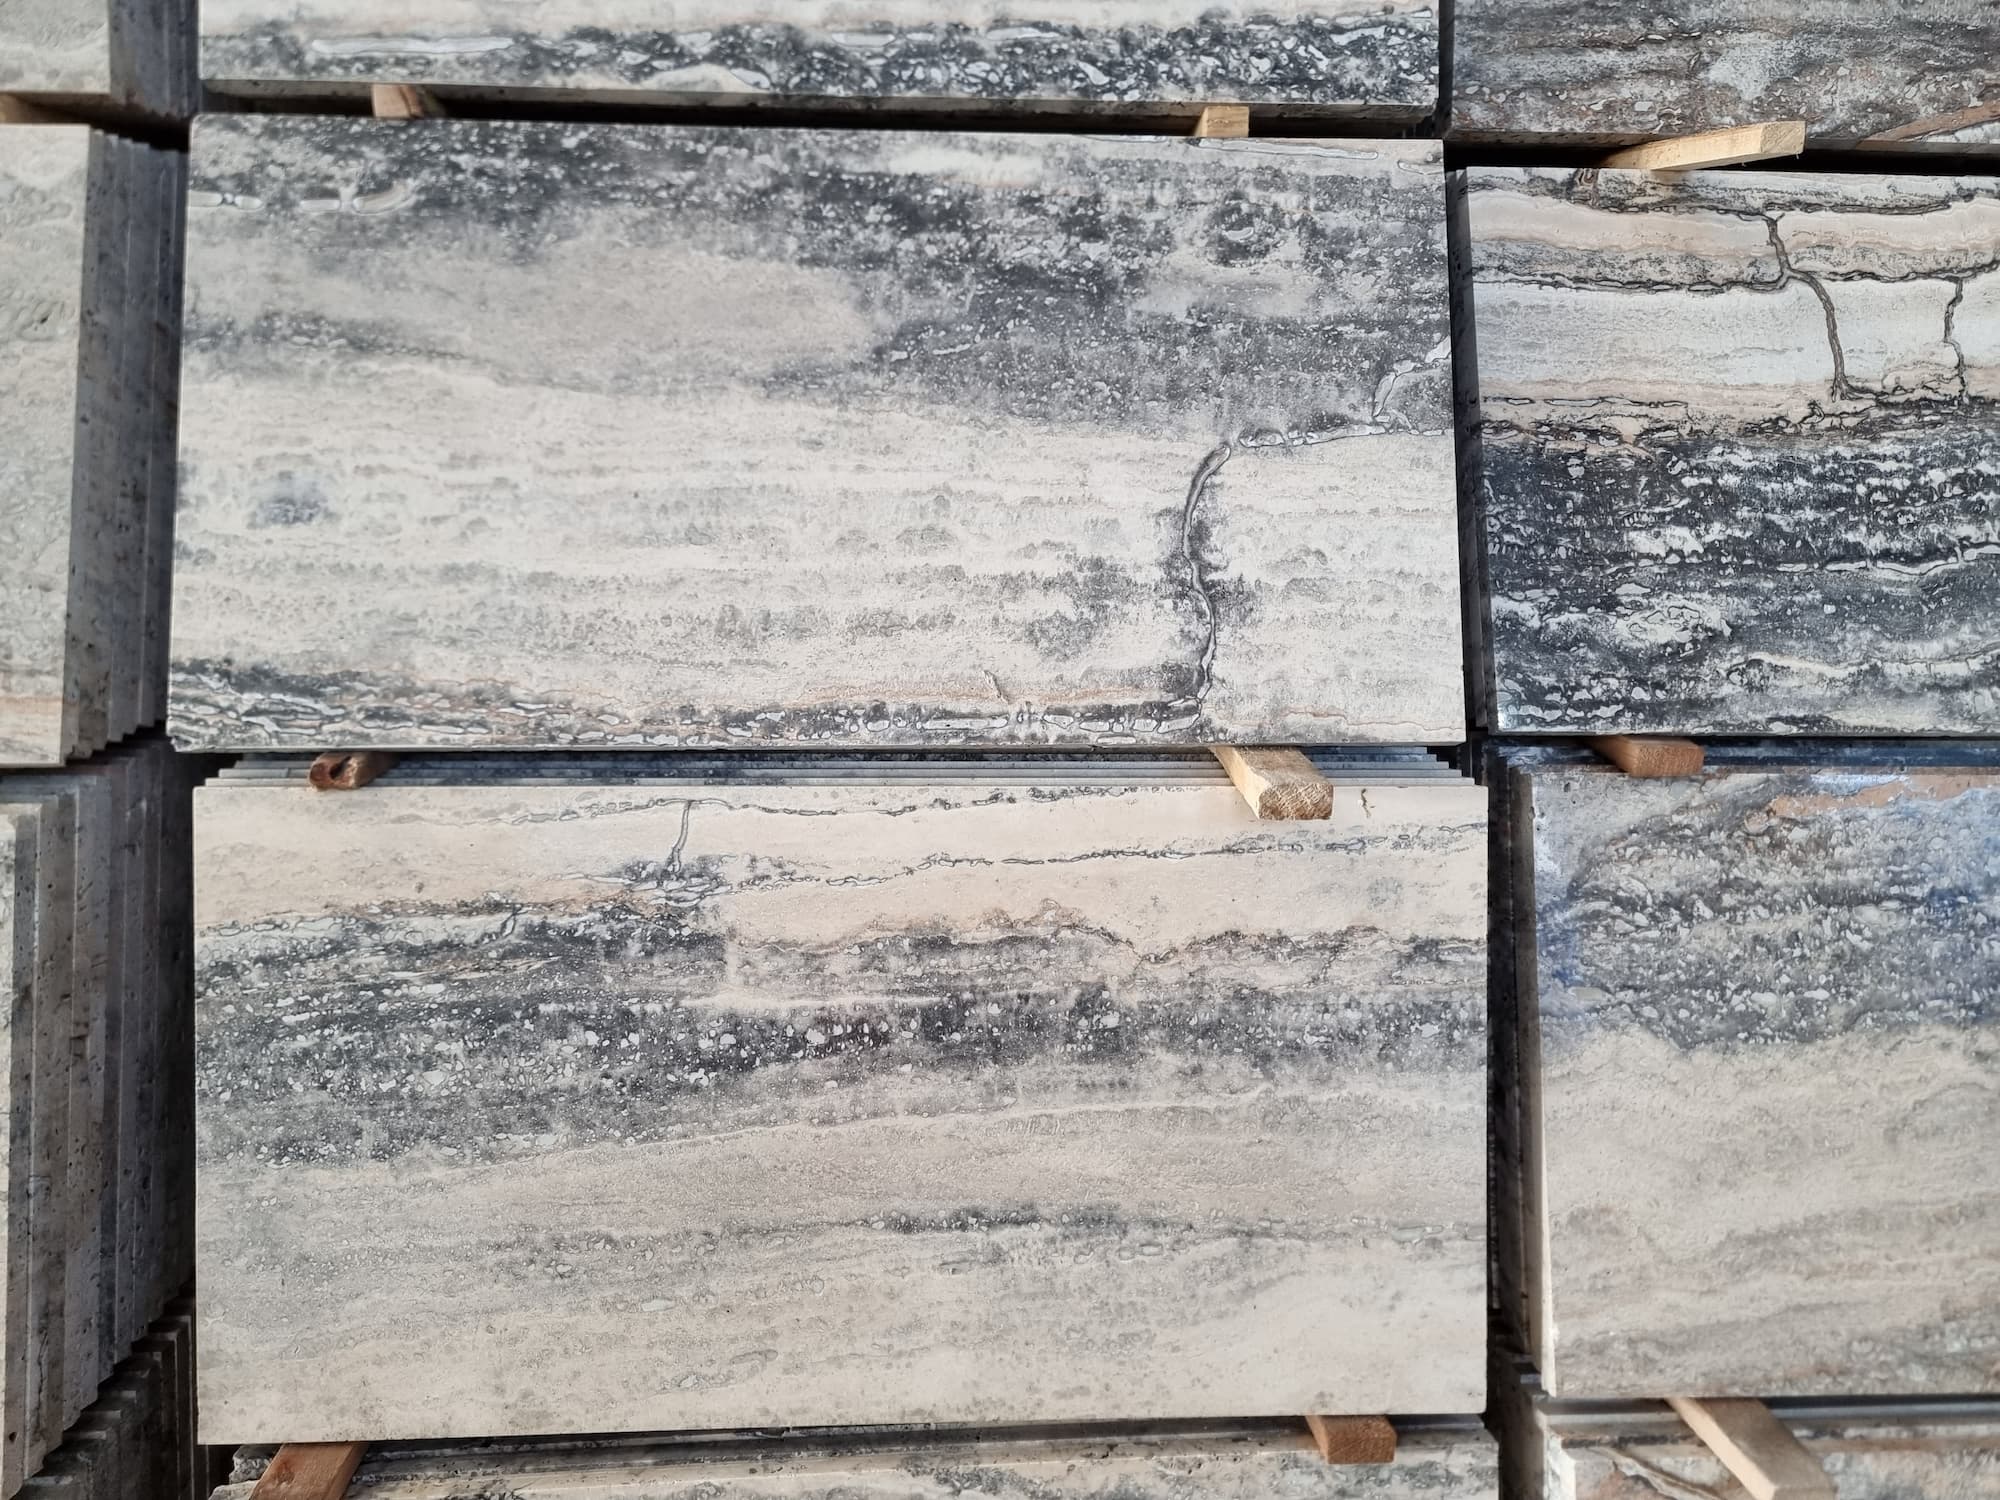 - The different colors and patterns of silver travertine